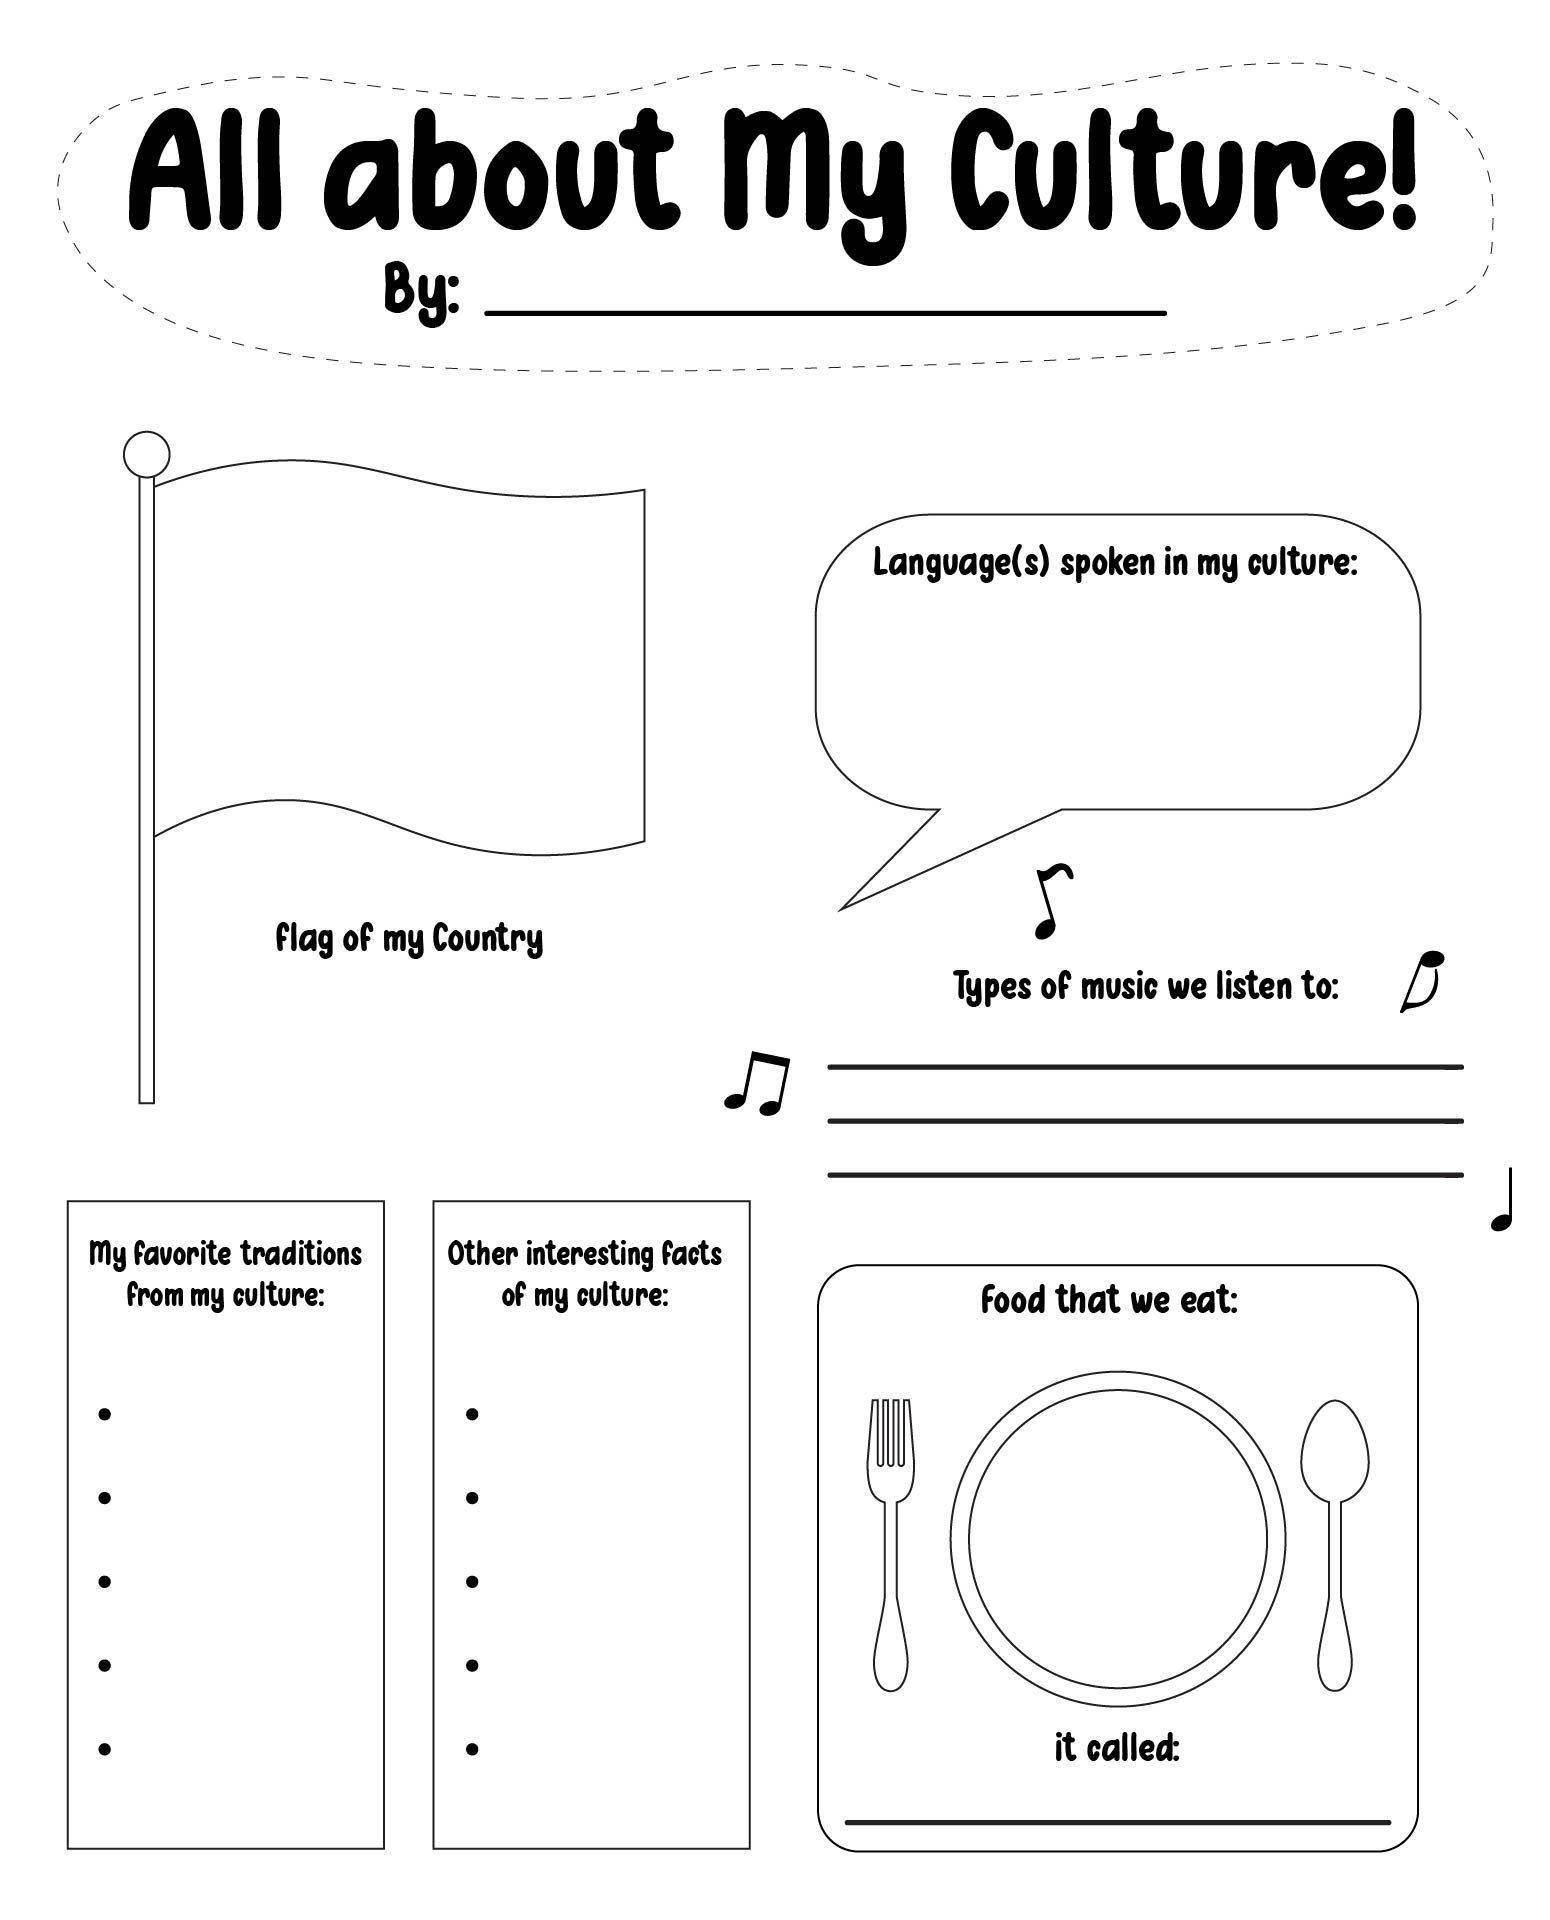 All About My Culture Printable Activity Sheet